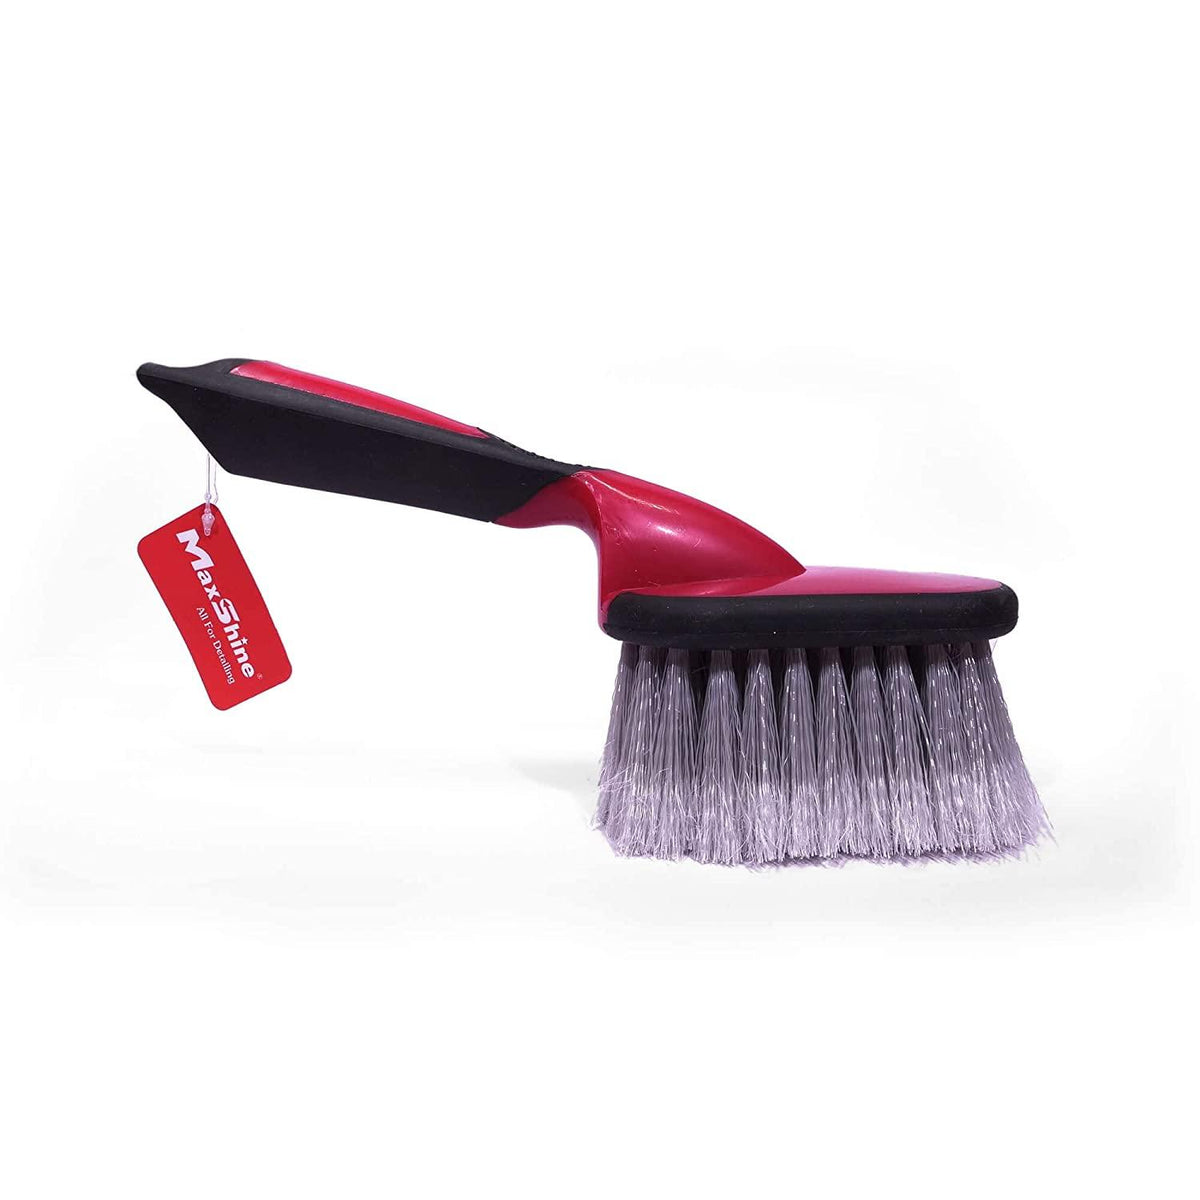 Maxshine All Purpose Long Handled Stiff Bristle Brush, Perfect for Tire &  Carpet, Home/Office Cleaning